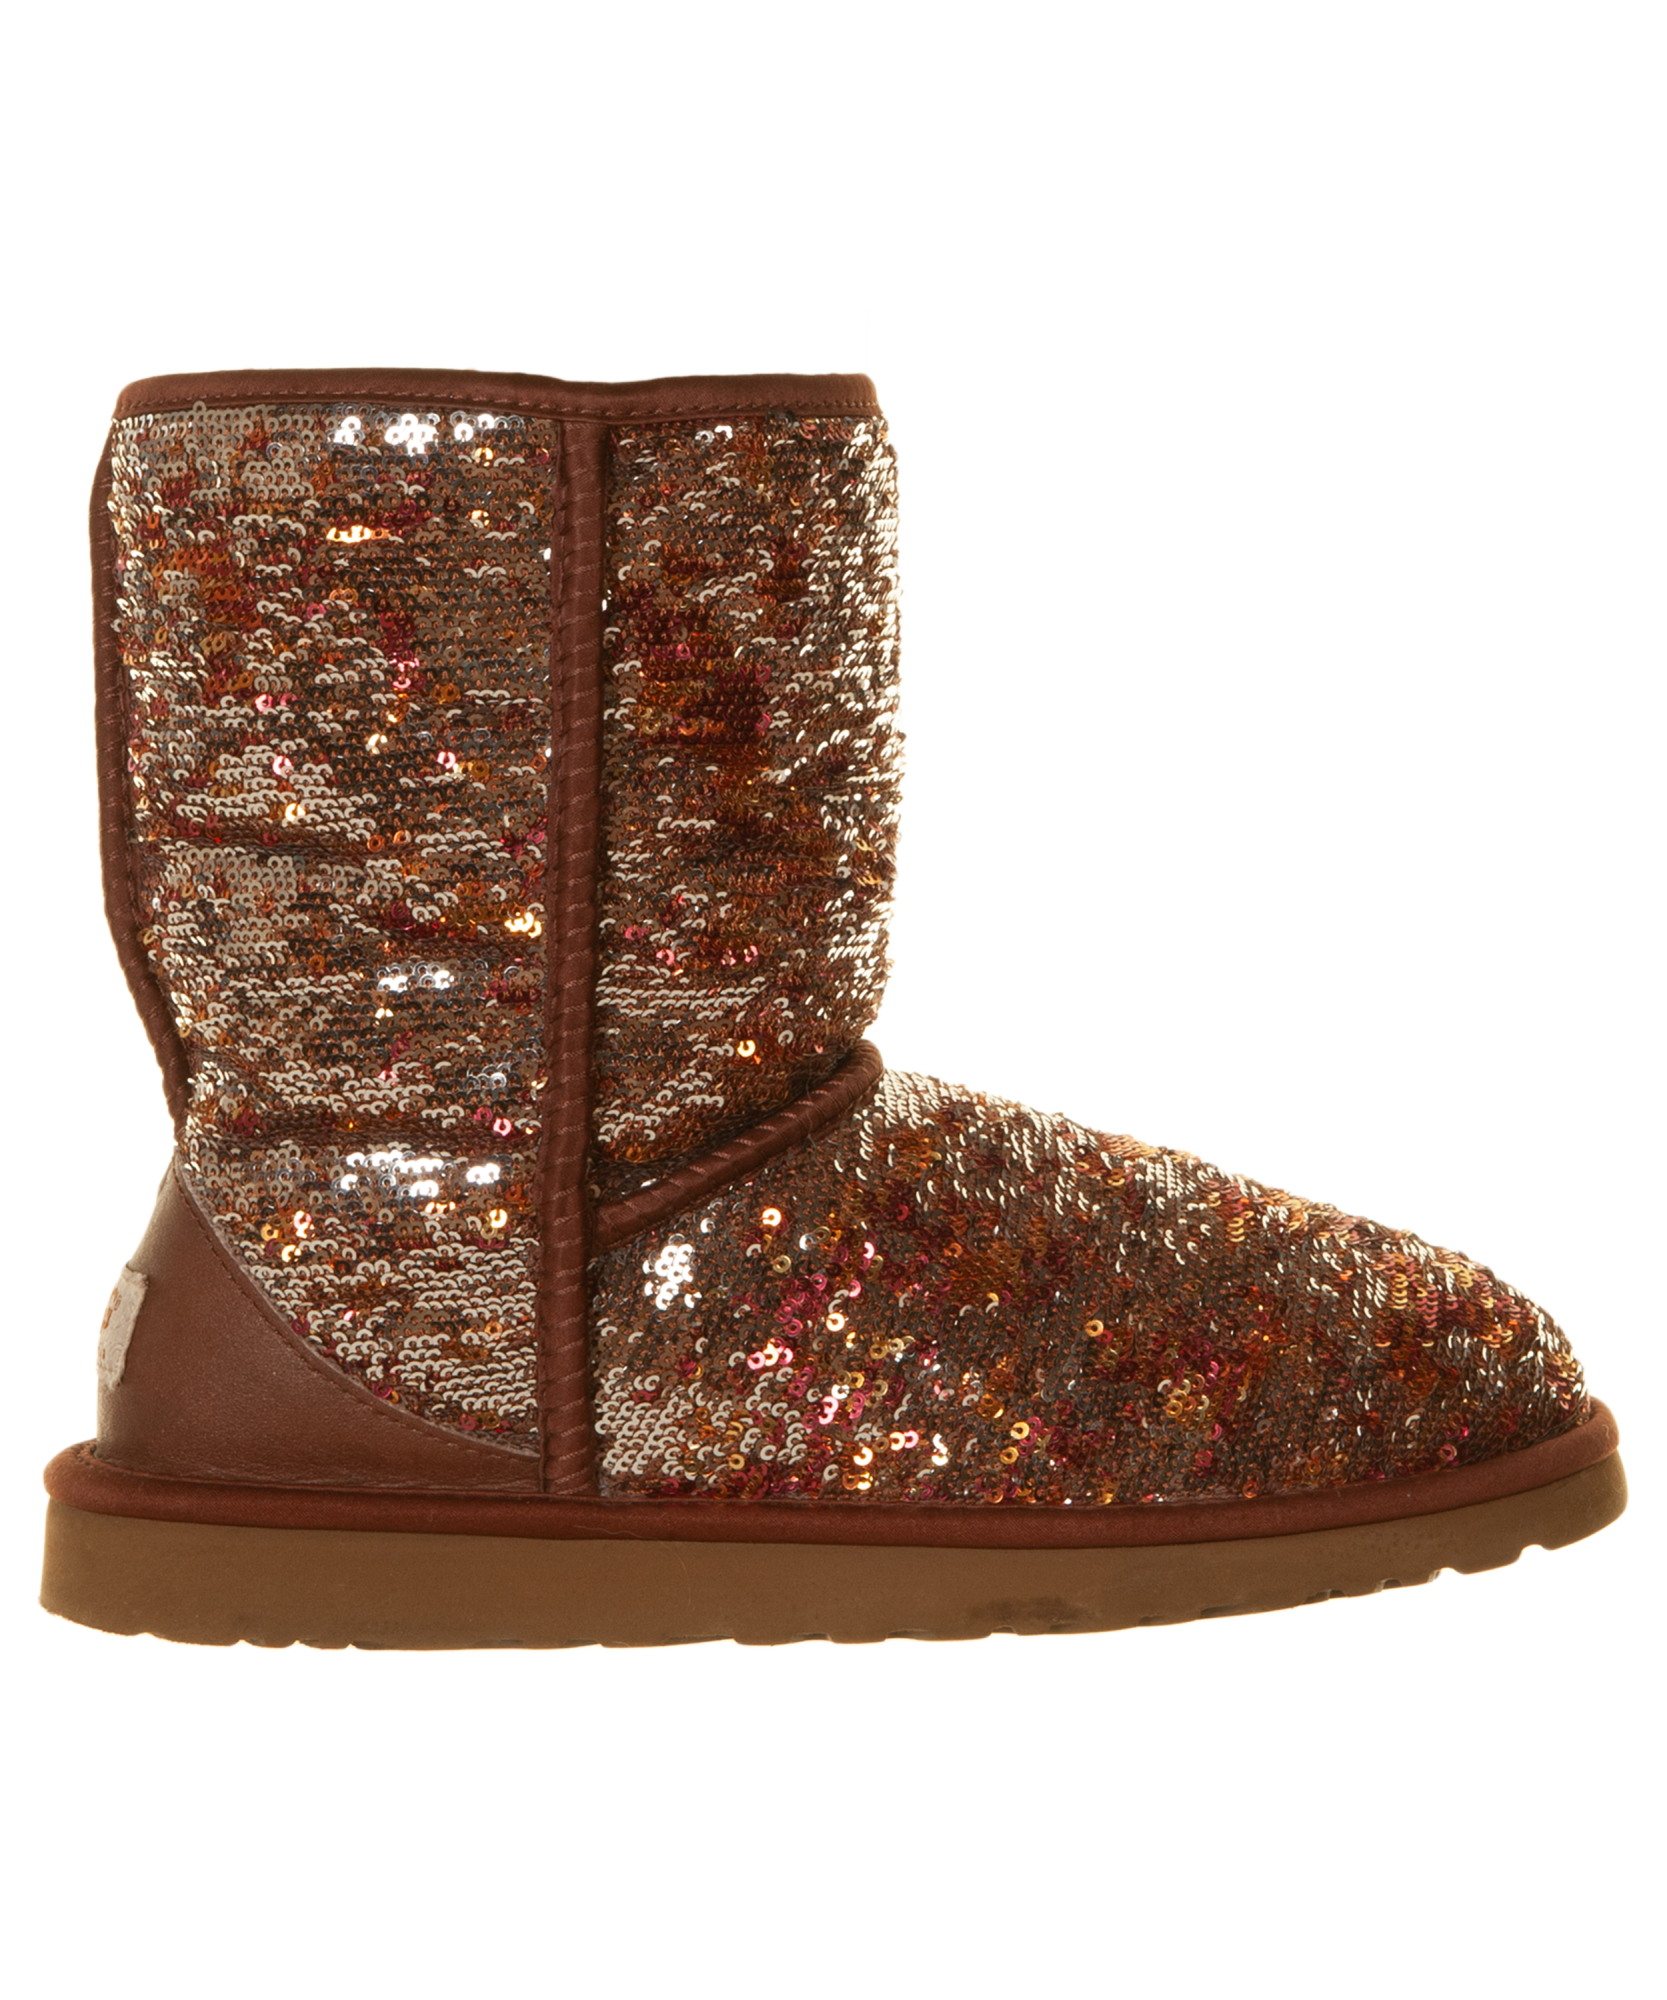 Ugg Classic Brown Short Sequin Boot - Ugg